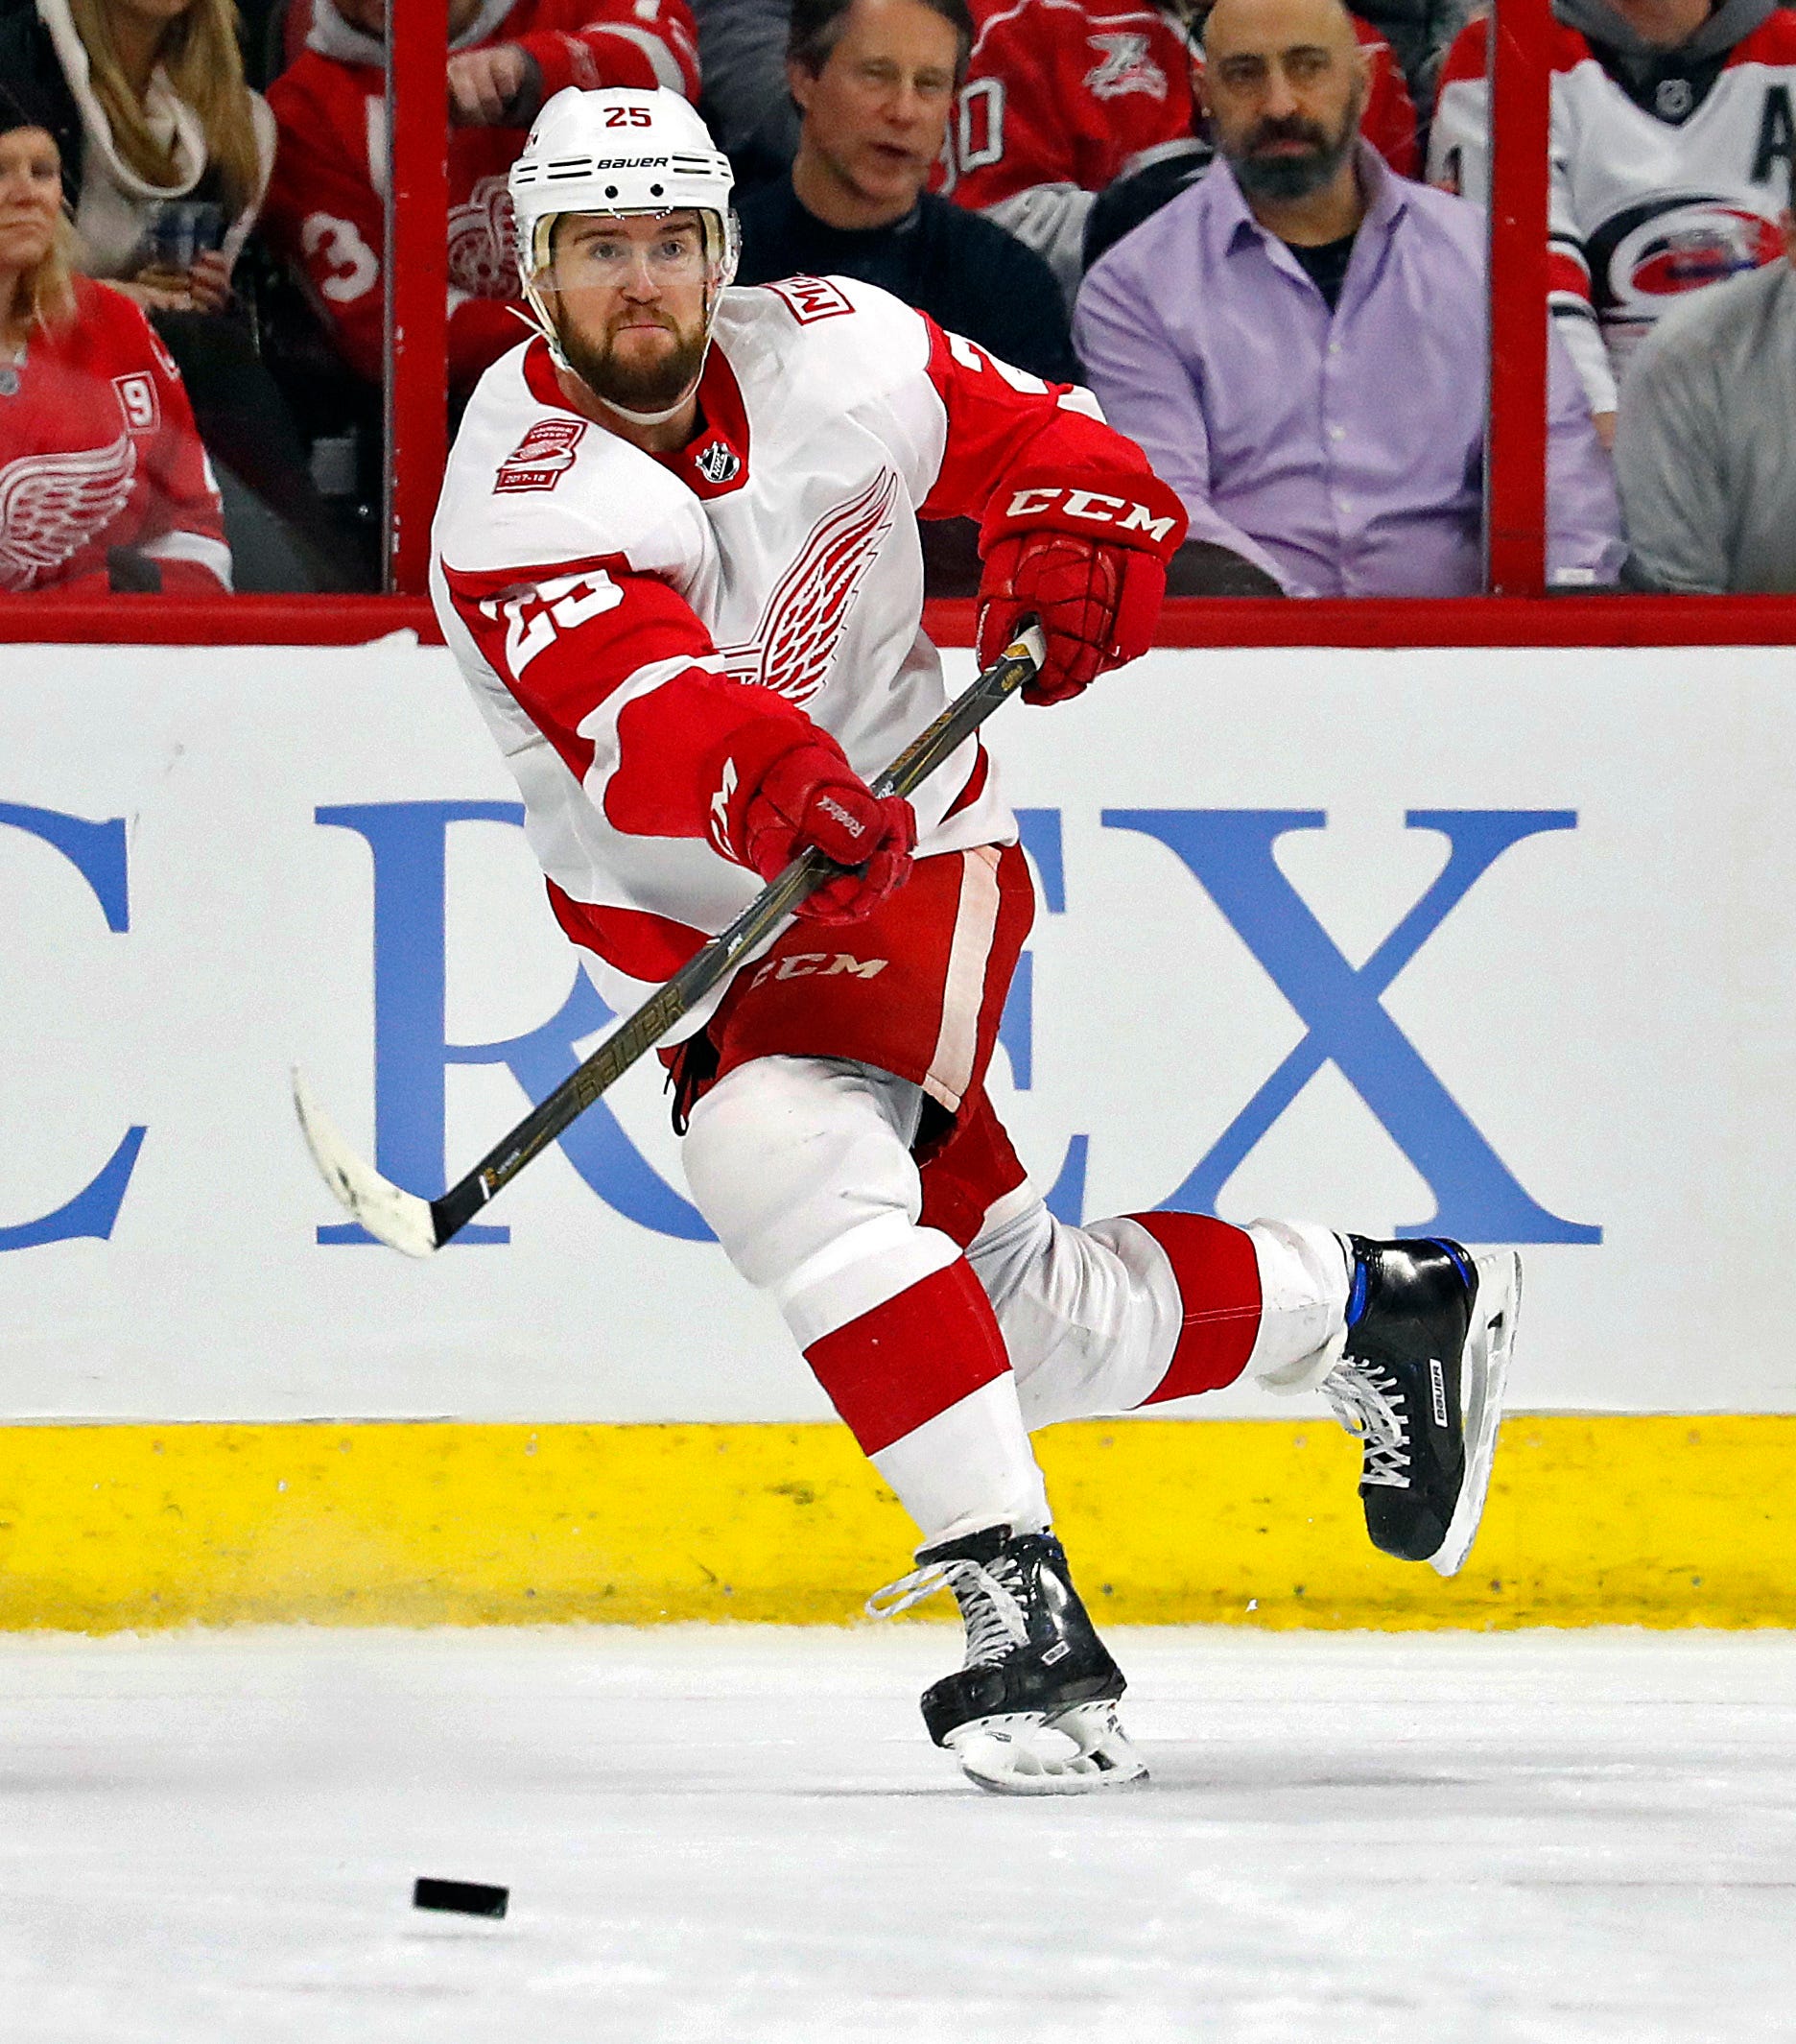 AP source: Red Wings agree to terms with Green on new deal